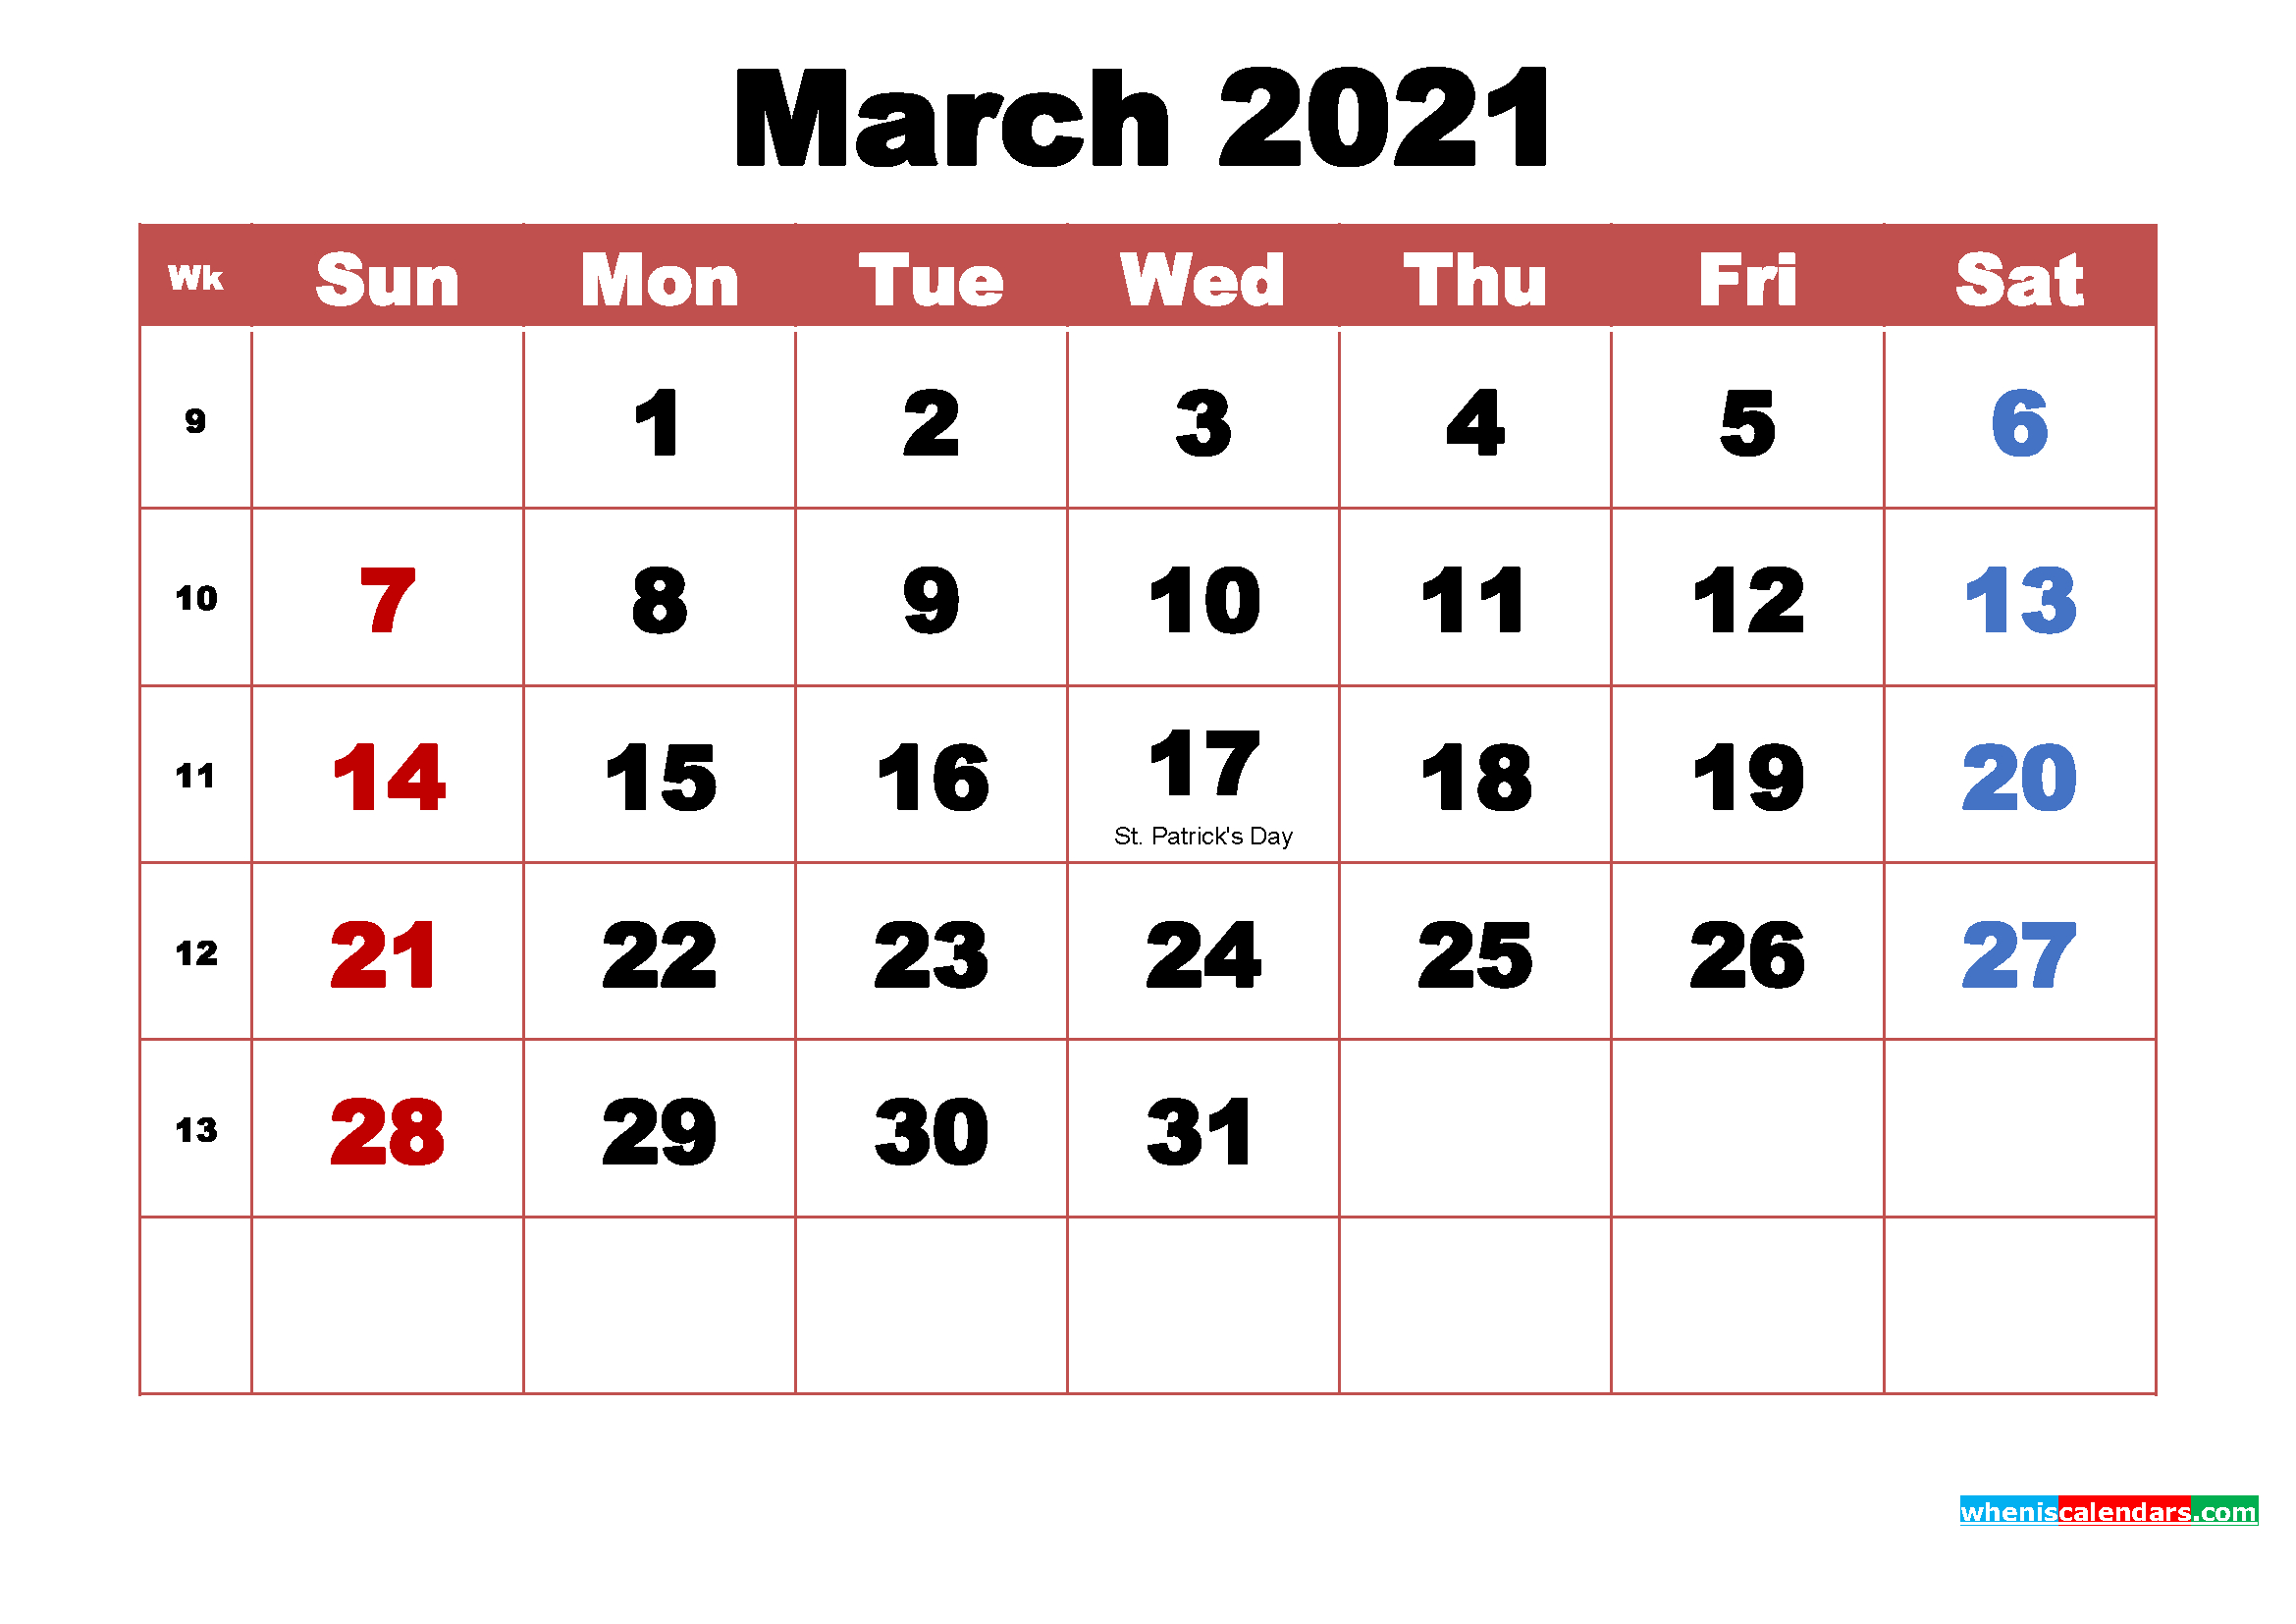 March 2021 Calendar Wallpapers - Top Free March 2021